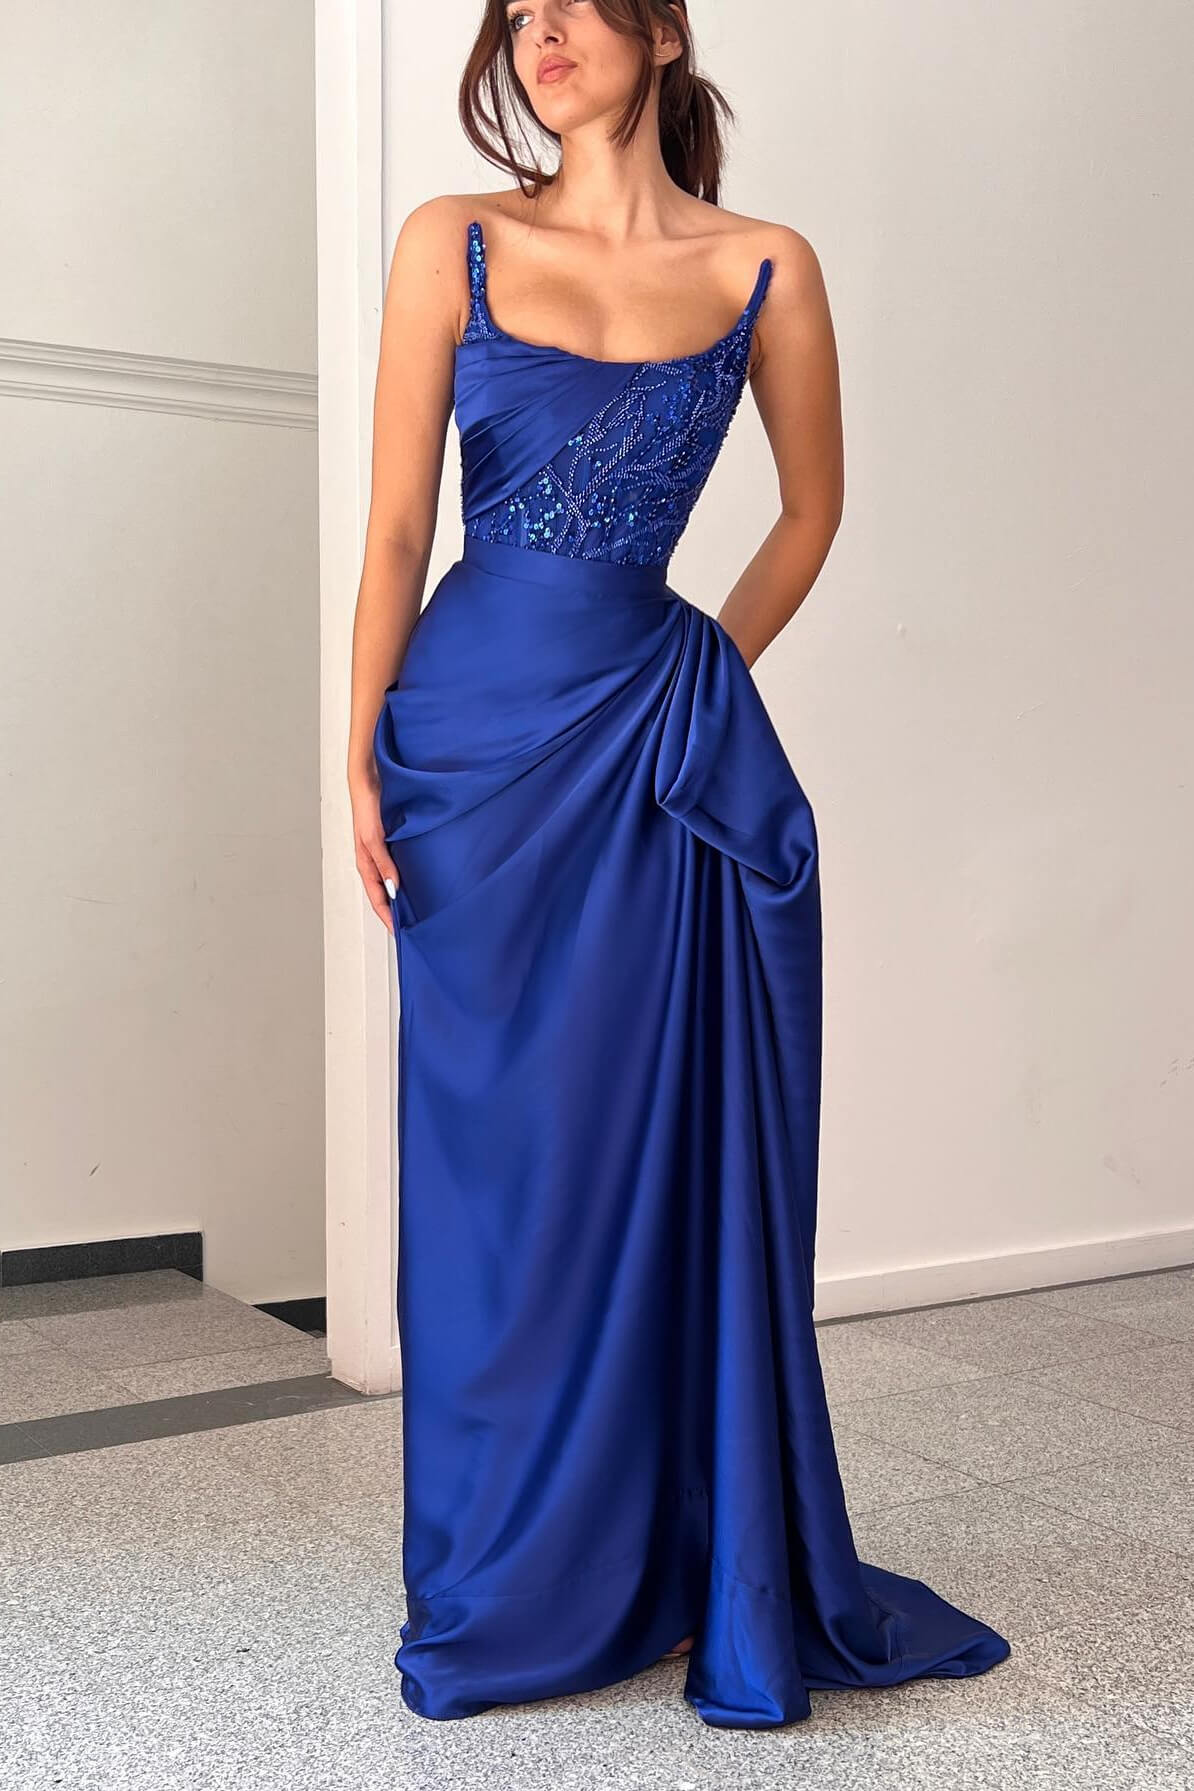 Stunning Royal Blue Mermaid Evening Prom Dress Long Strapless With Sequins - lulusllly